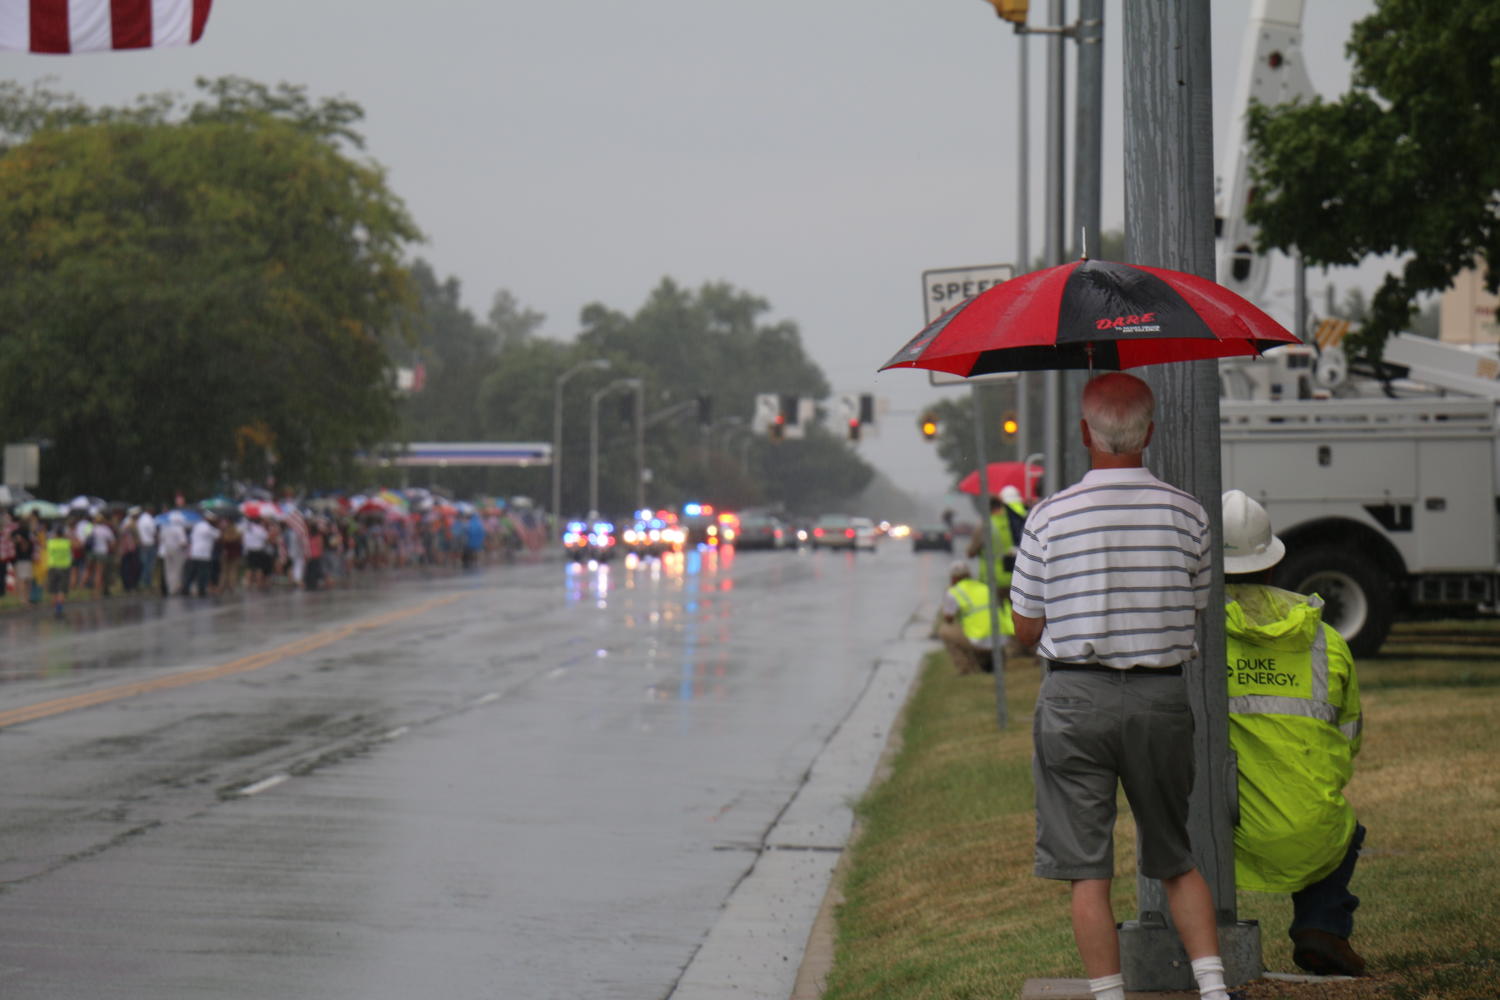 Community members shelter under umbrellas and hard hats as Sgt. Hunters procession nears.